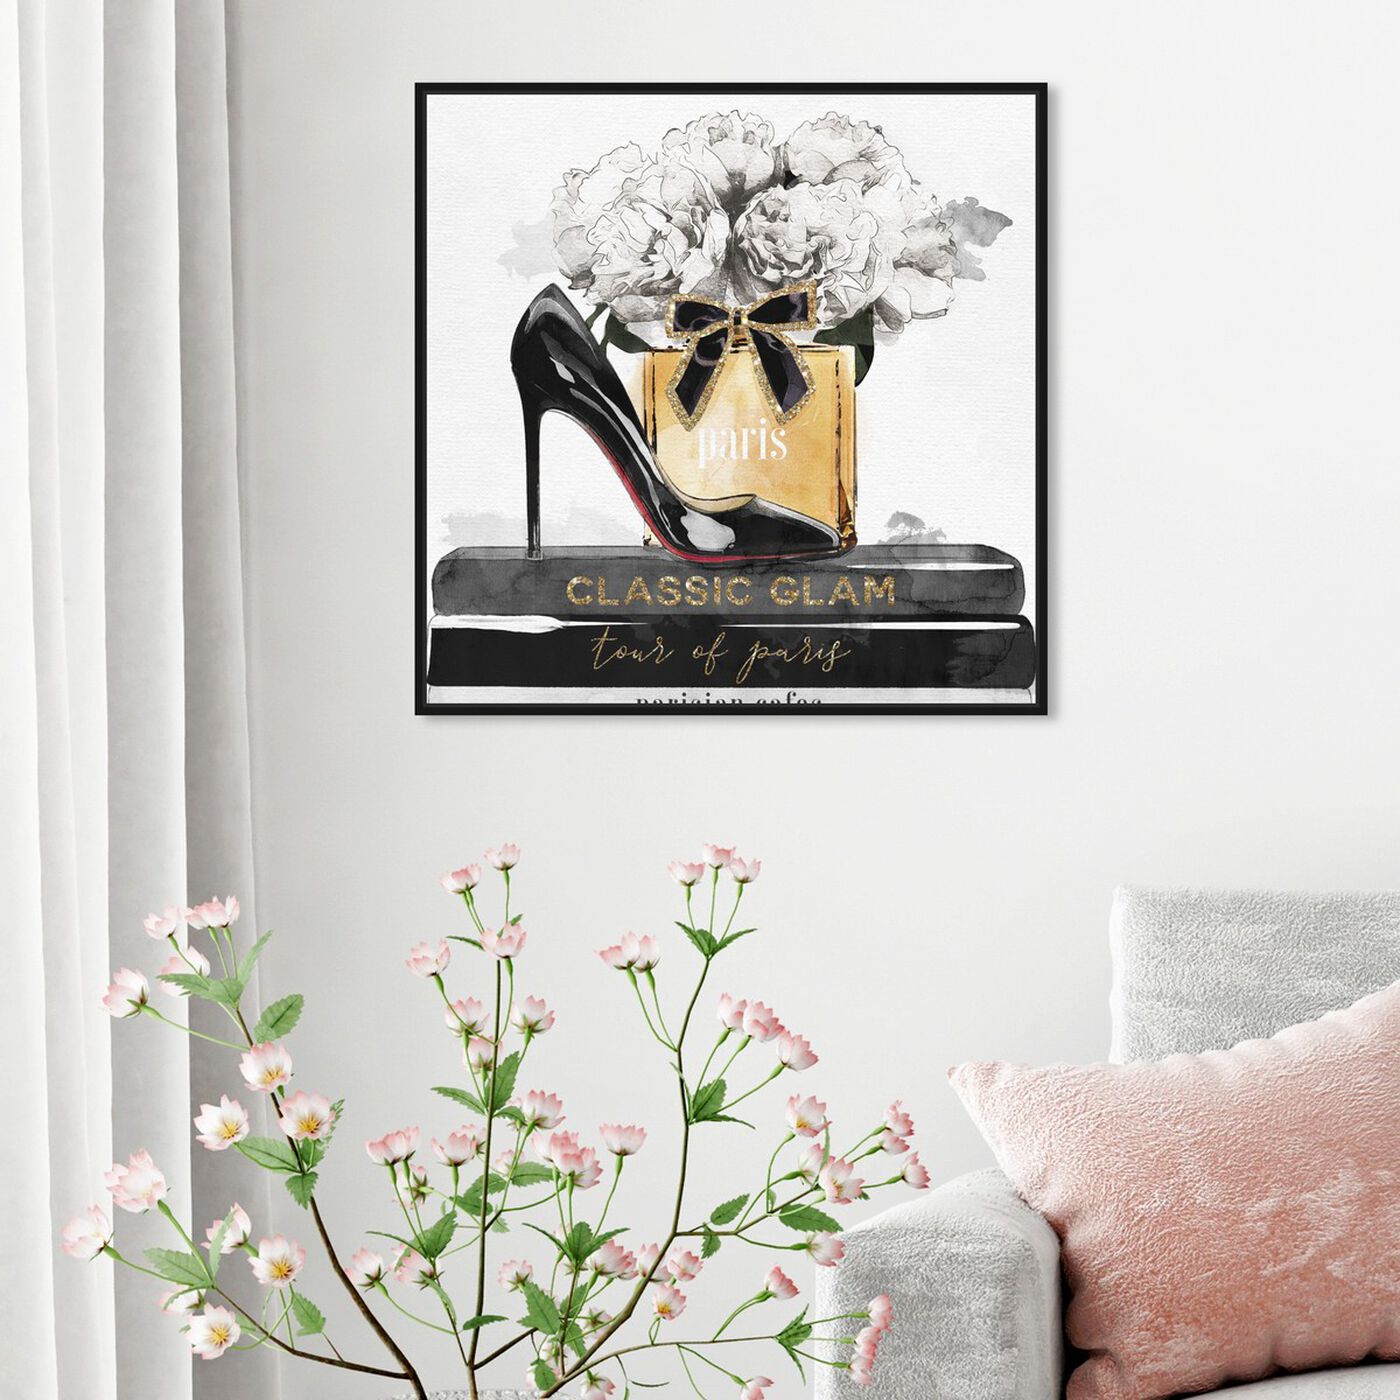 Hanging view of Glamorous Stack featuring fashion and glam and shoes art.